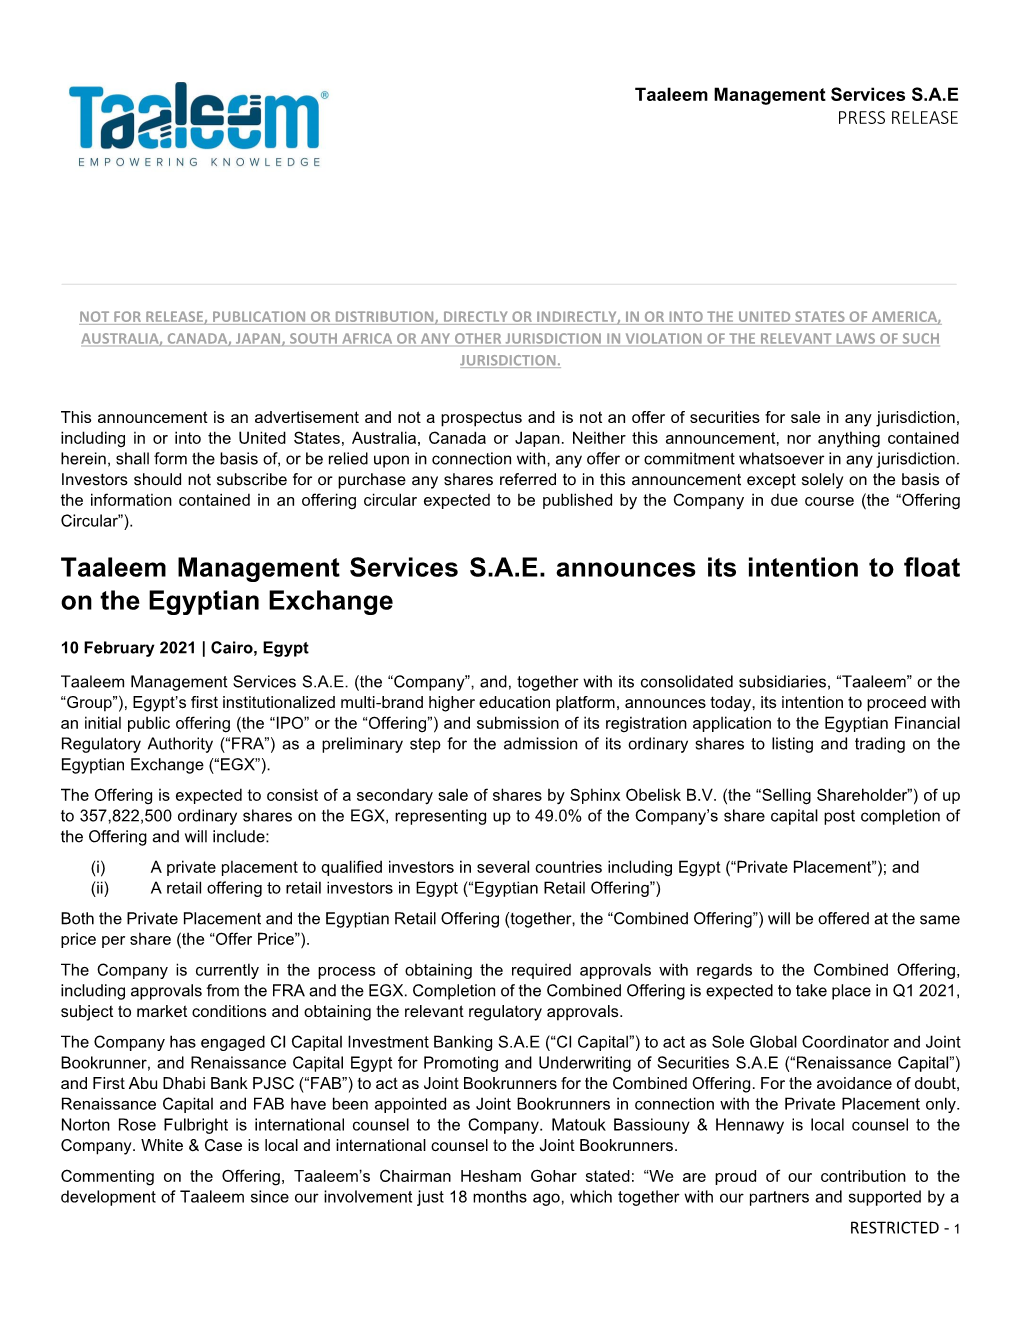 Taaleem Management Services S.A.E. Announces Its Intention to Float on the Egyptian Exchange